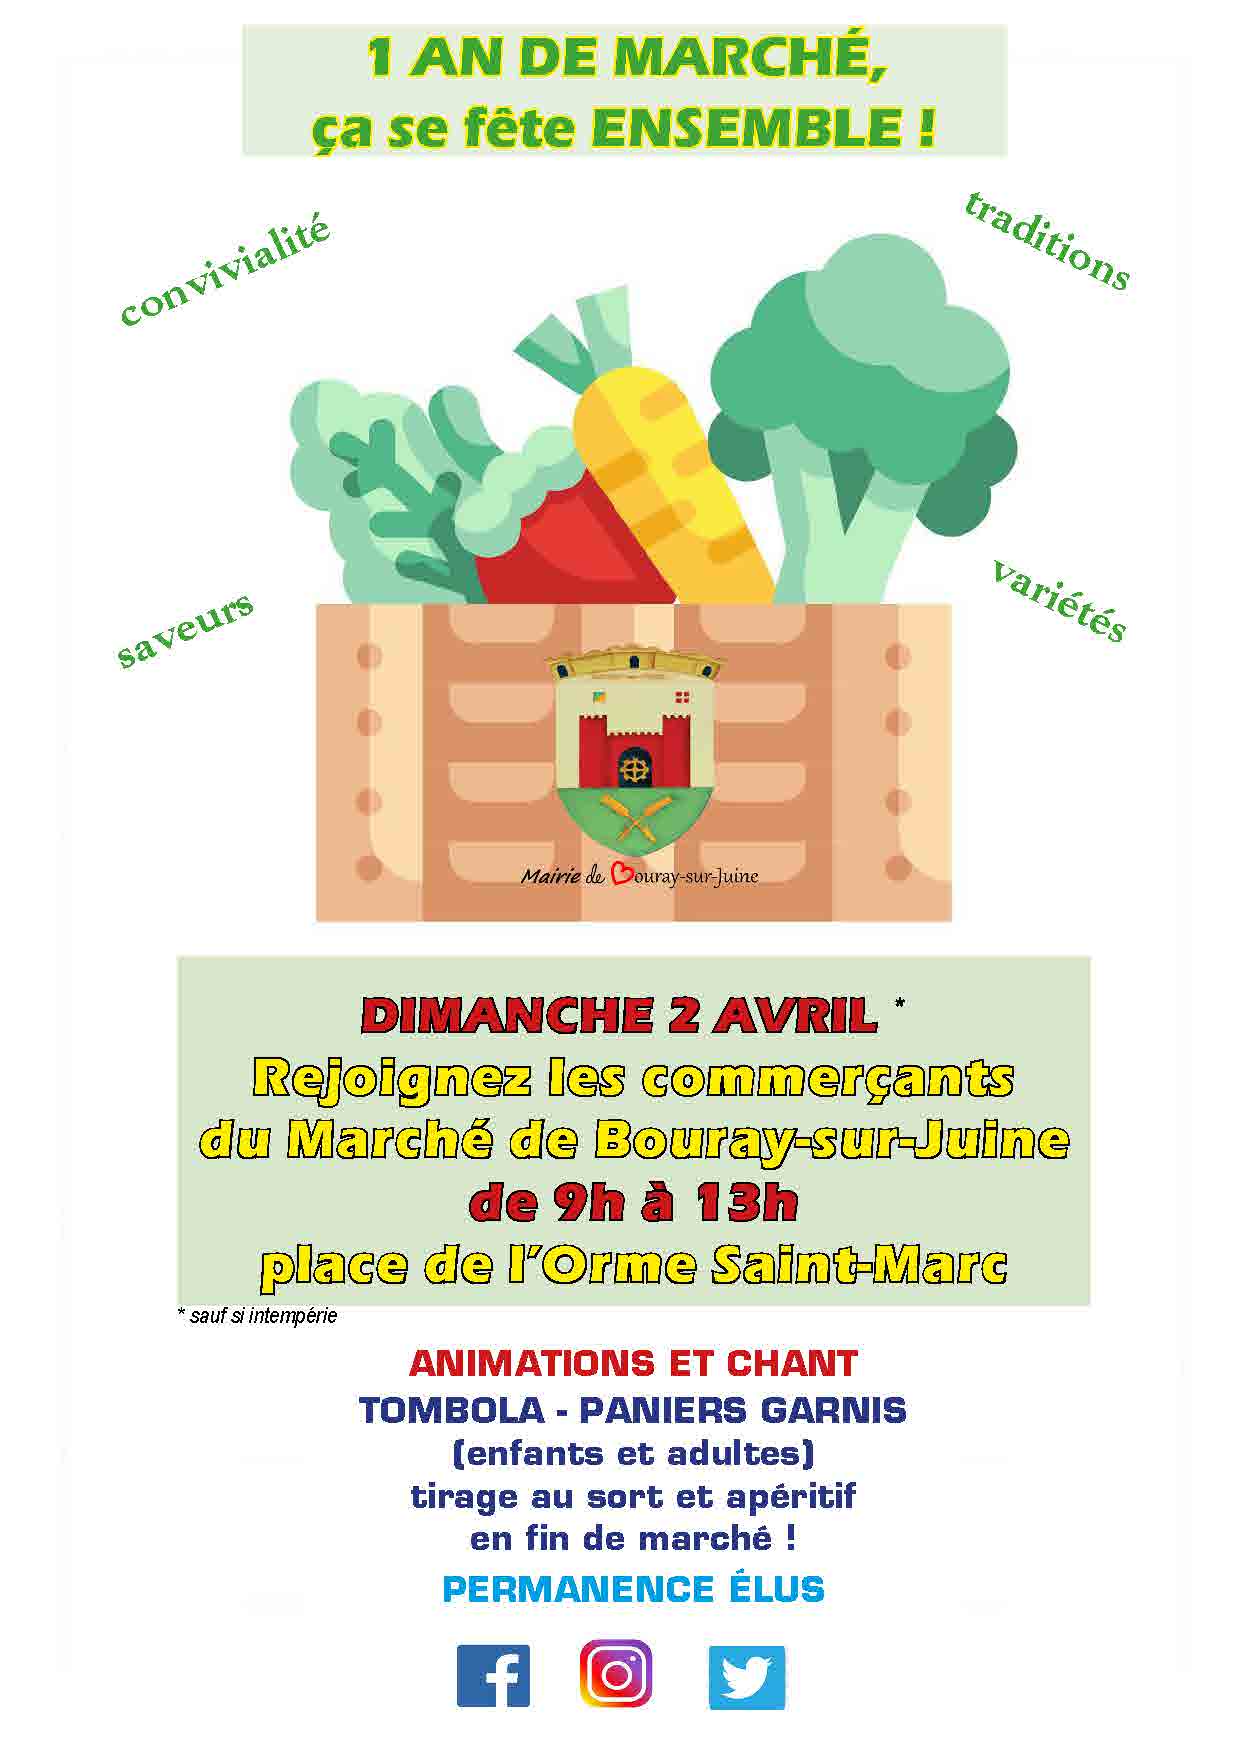 20230314 flyer 1 an marché Page 1